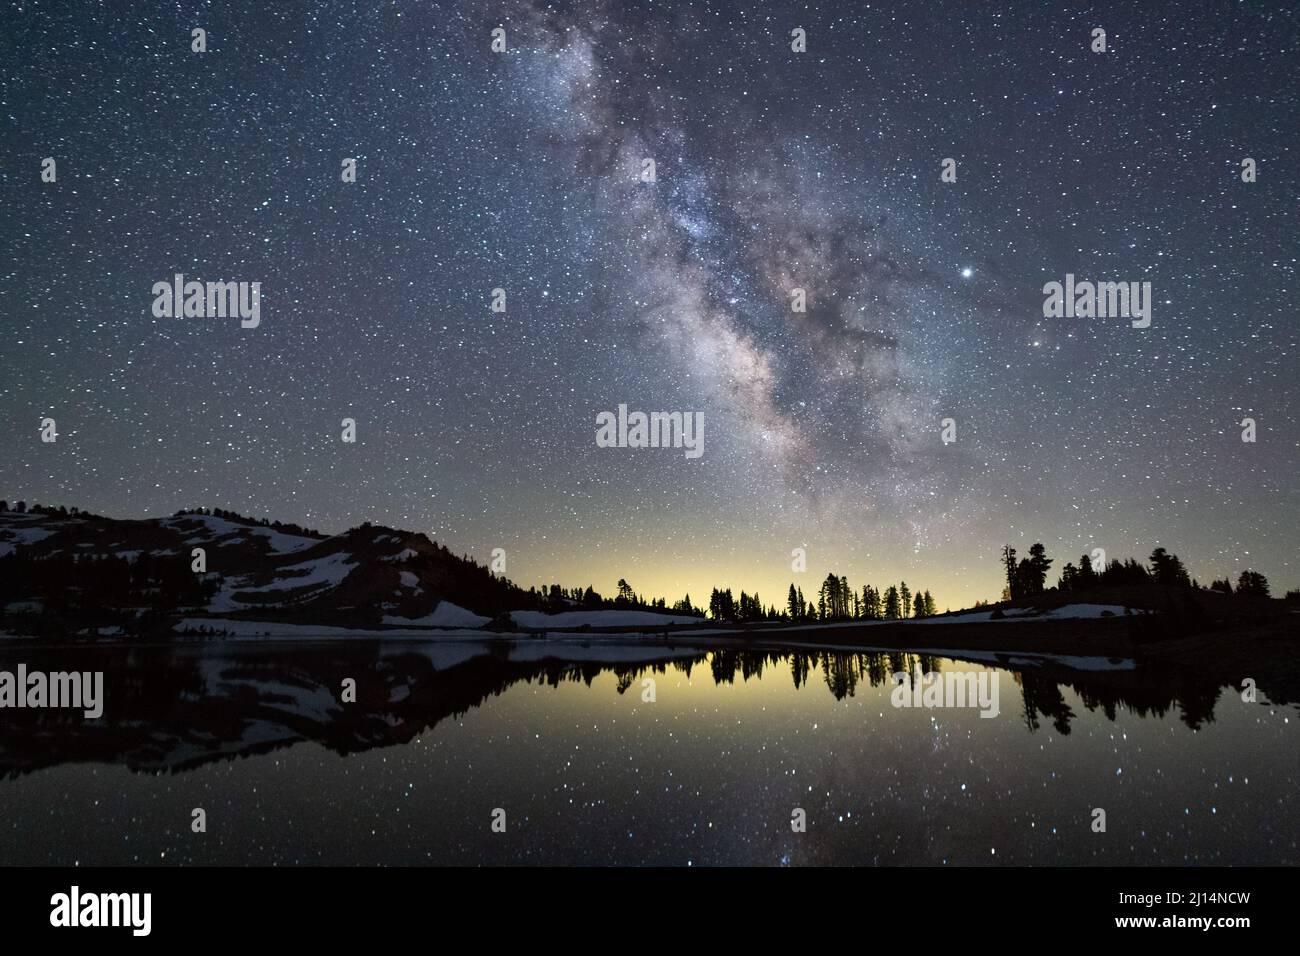 The Milky Way galaxy and stars over Emerald Lake in Lassen Volcanic National Park, California Stock Photo